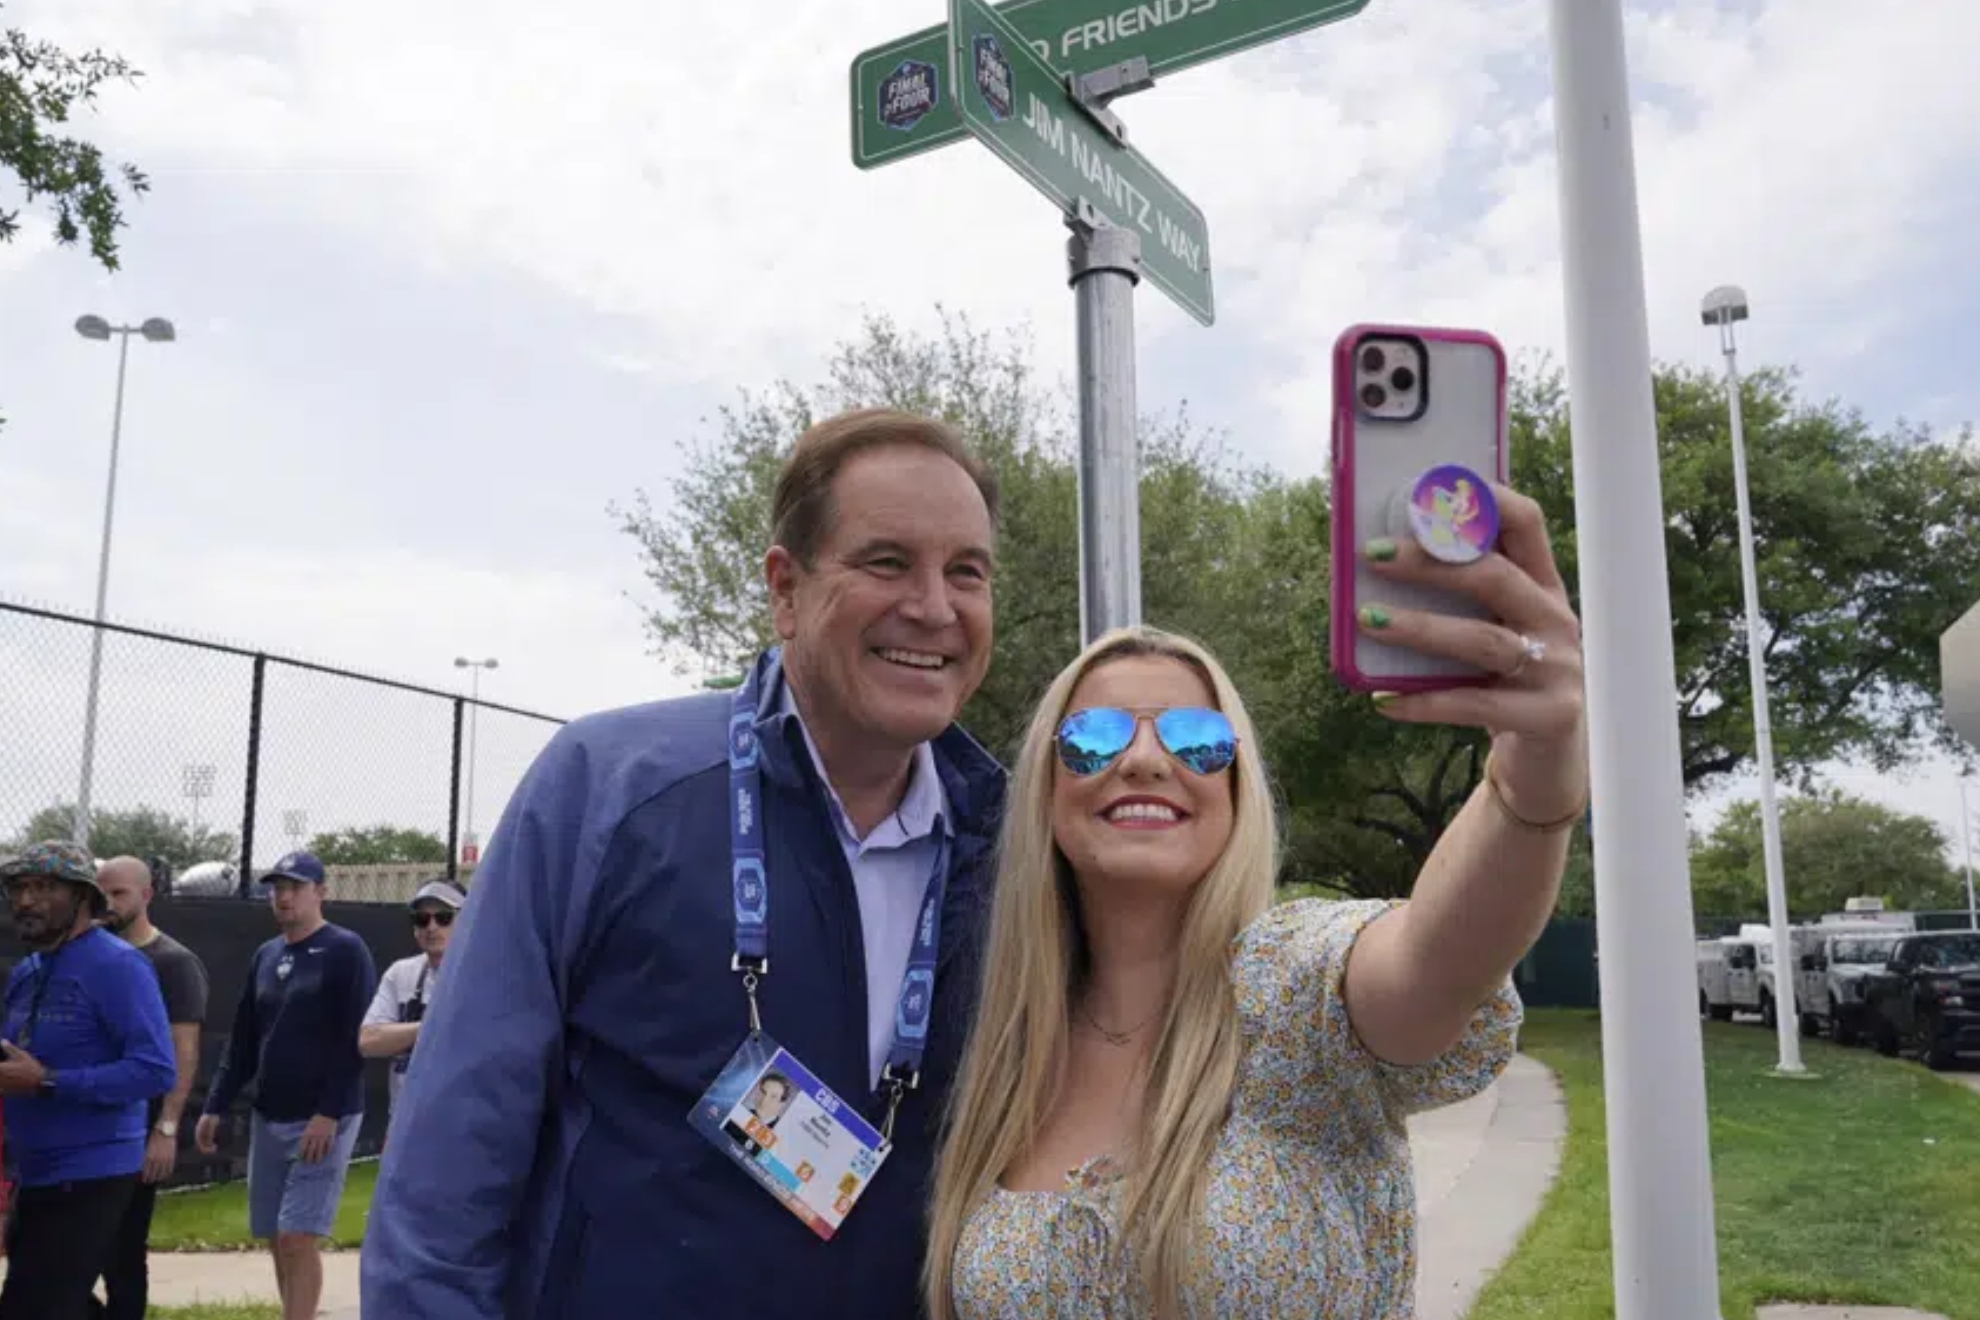 Jim Nantz taking a picture with a fan at March Madness.